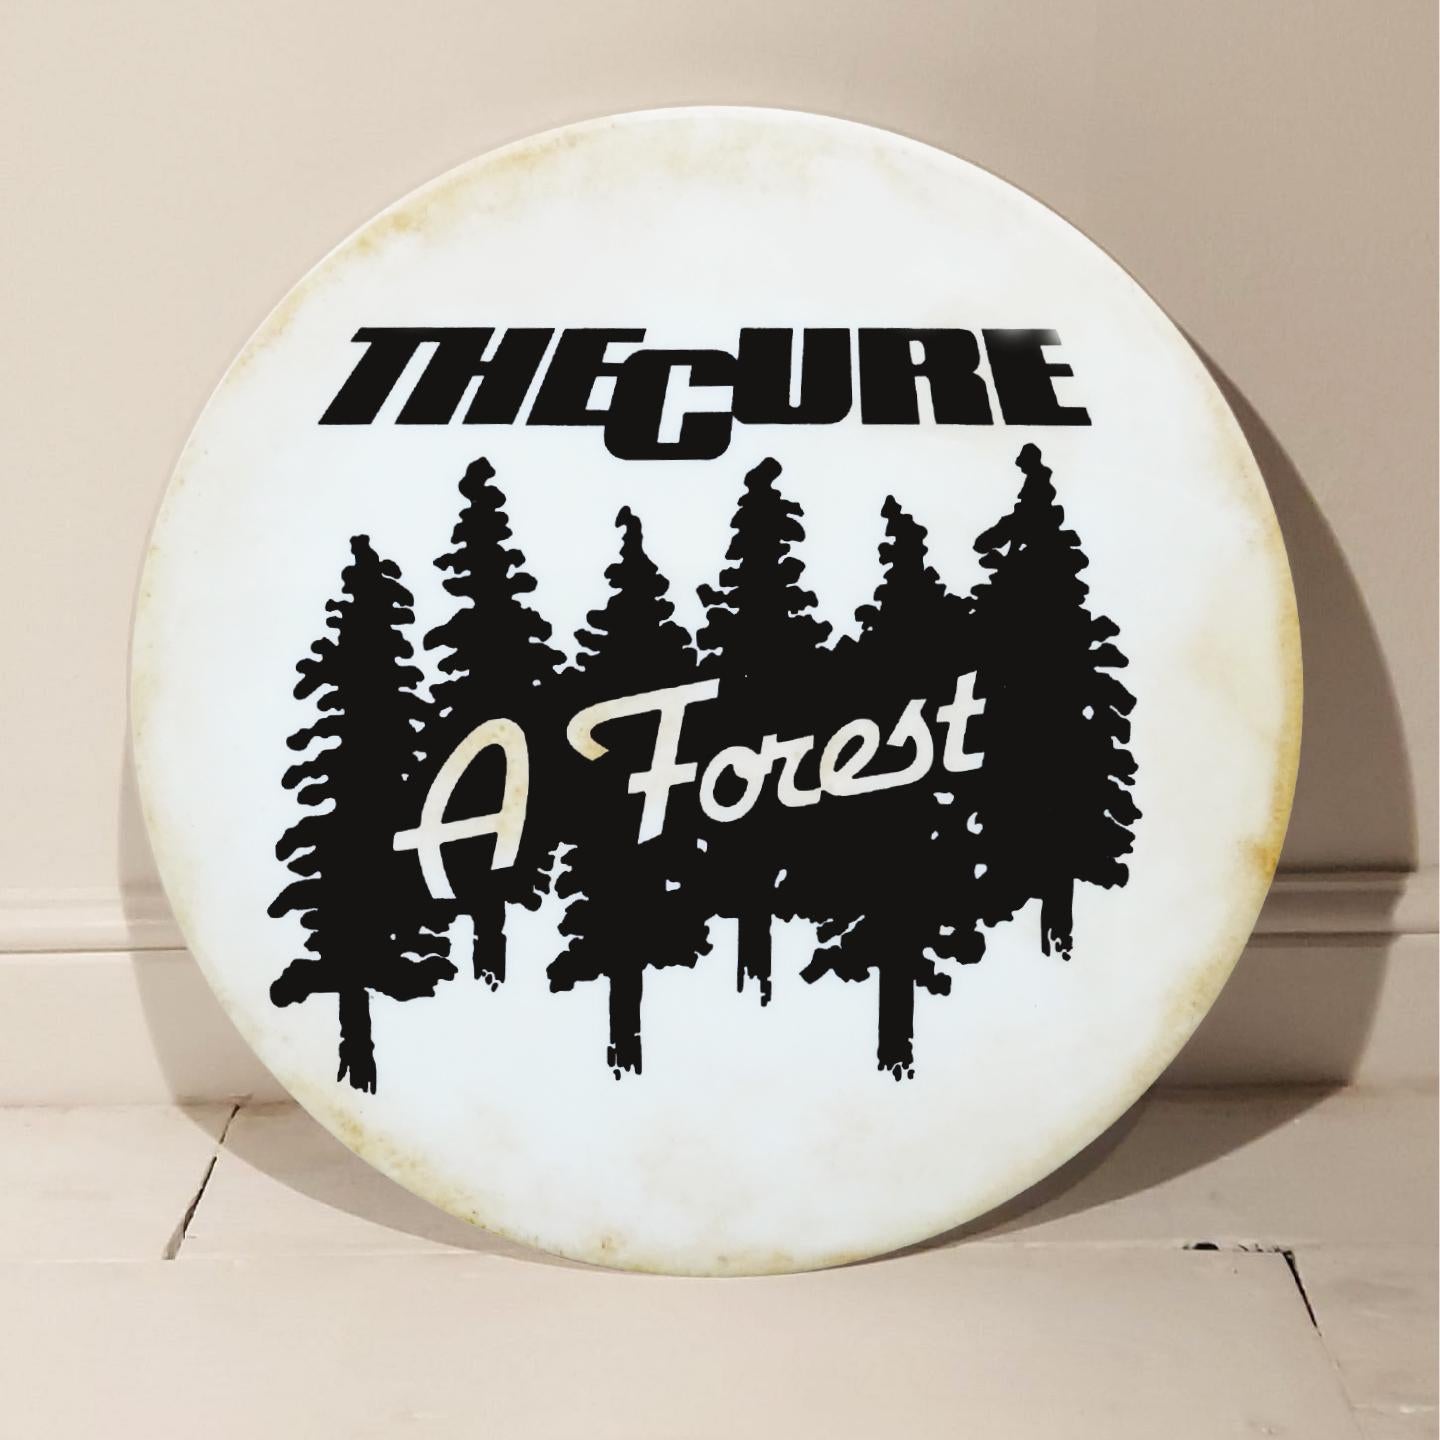 The Cure "A Forest" Giant Handmade 3D Vintage Button - Mixed Media Art by Tony Dennis